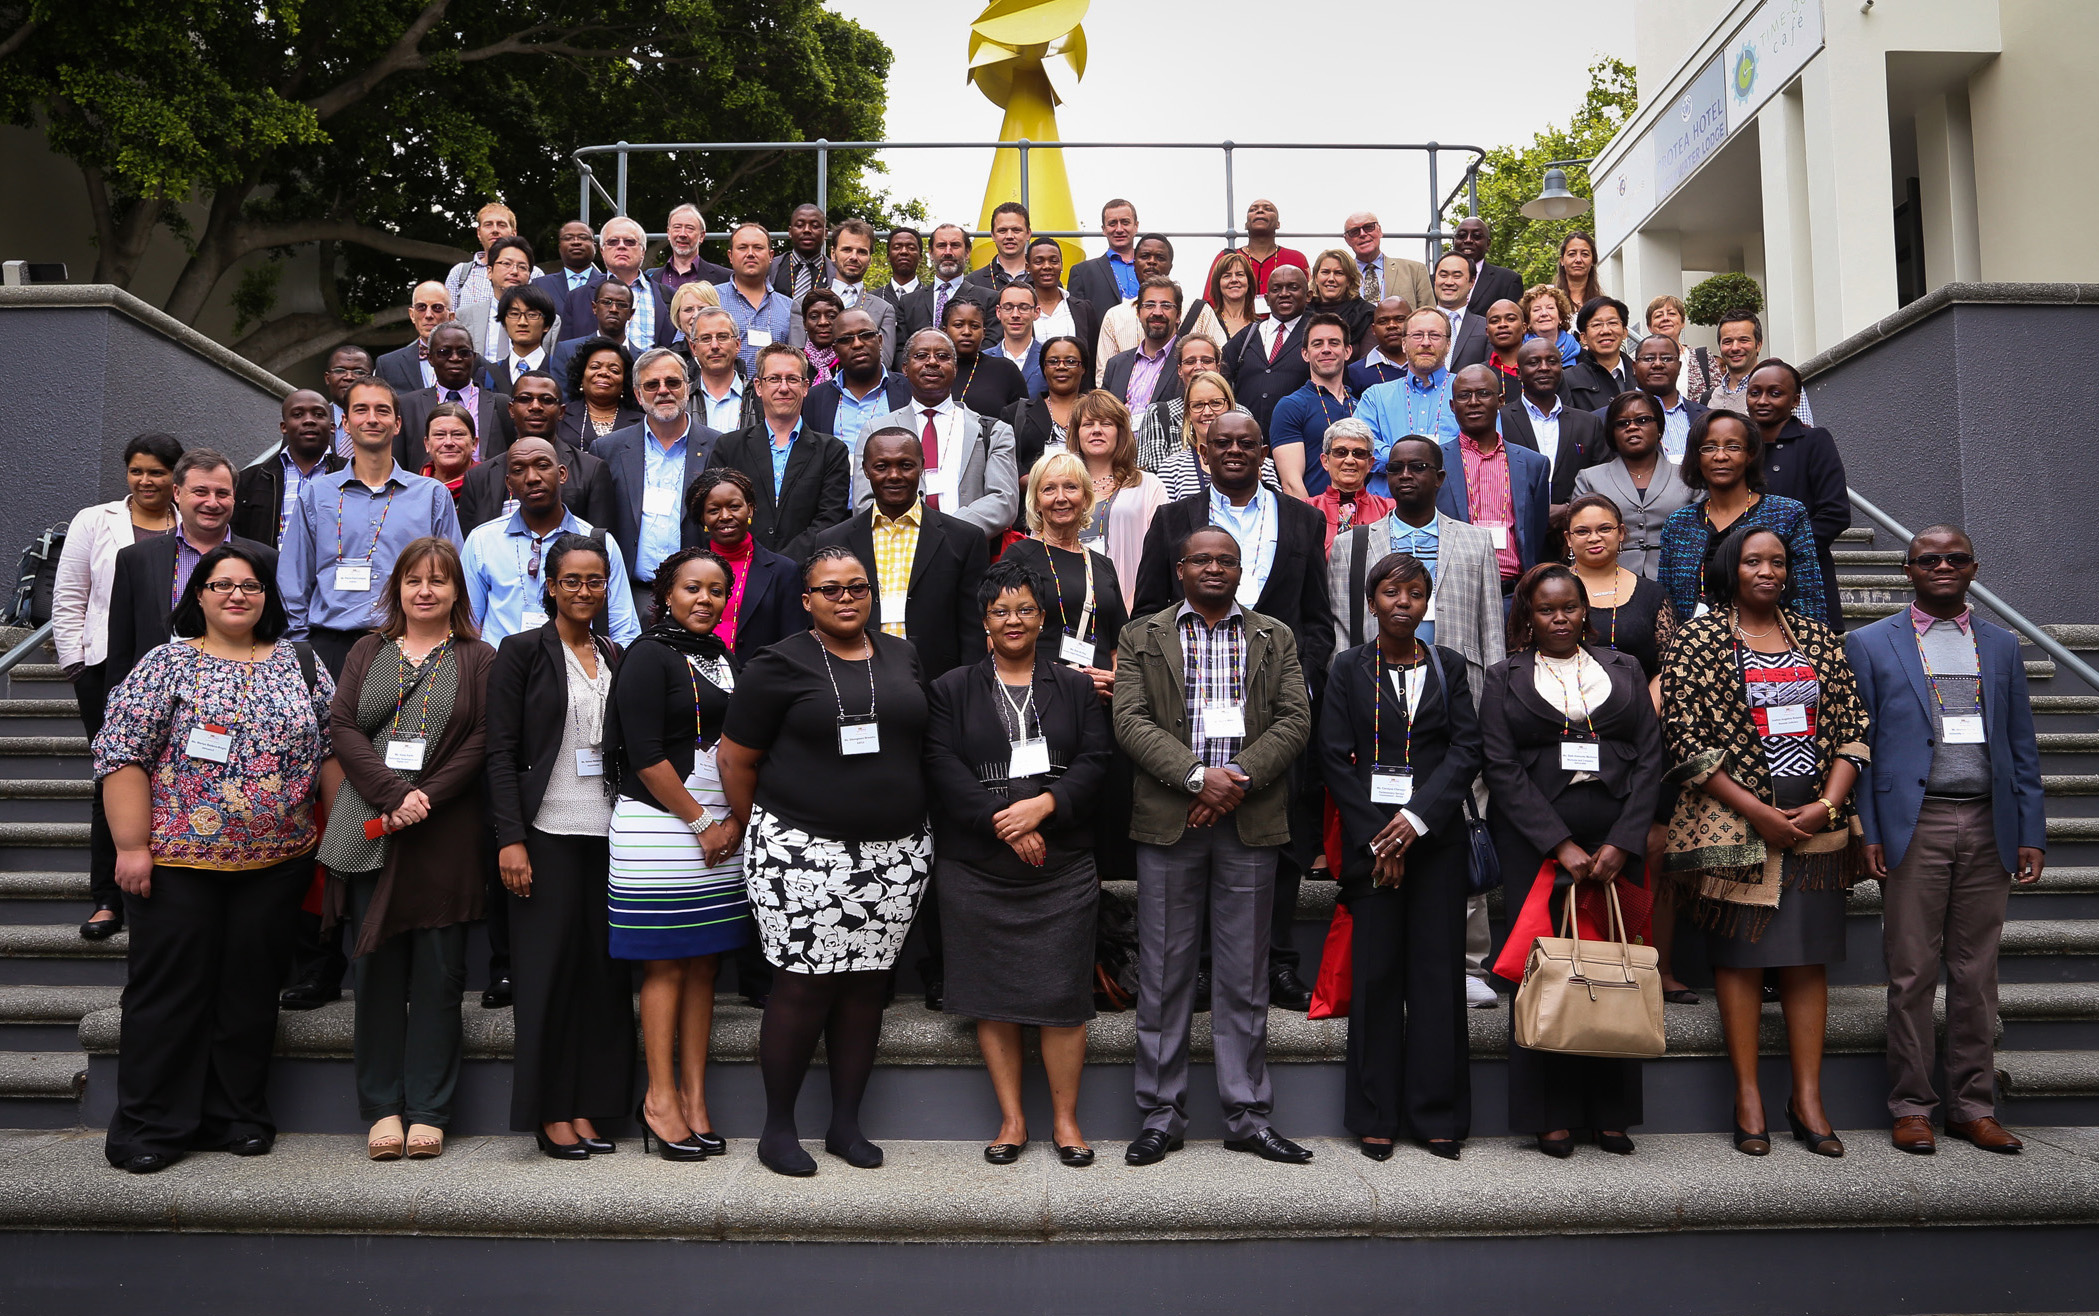 Group photo of 83 attendees from the Law Via the Internet Conference.